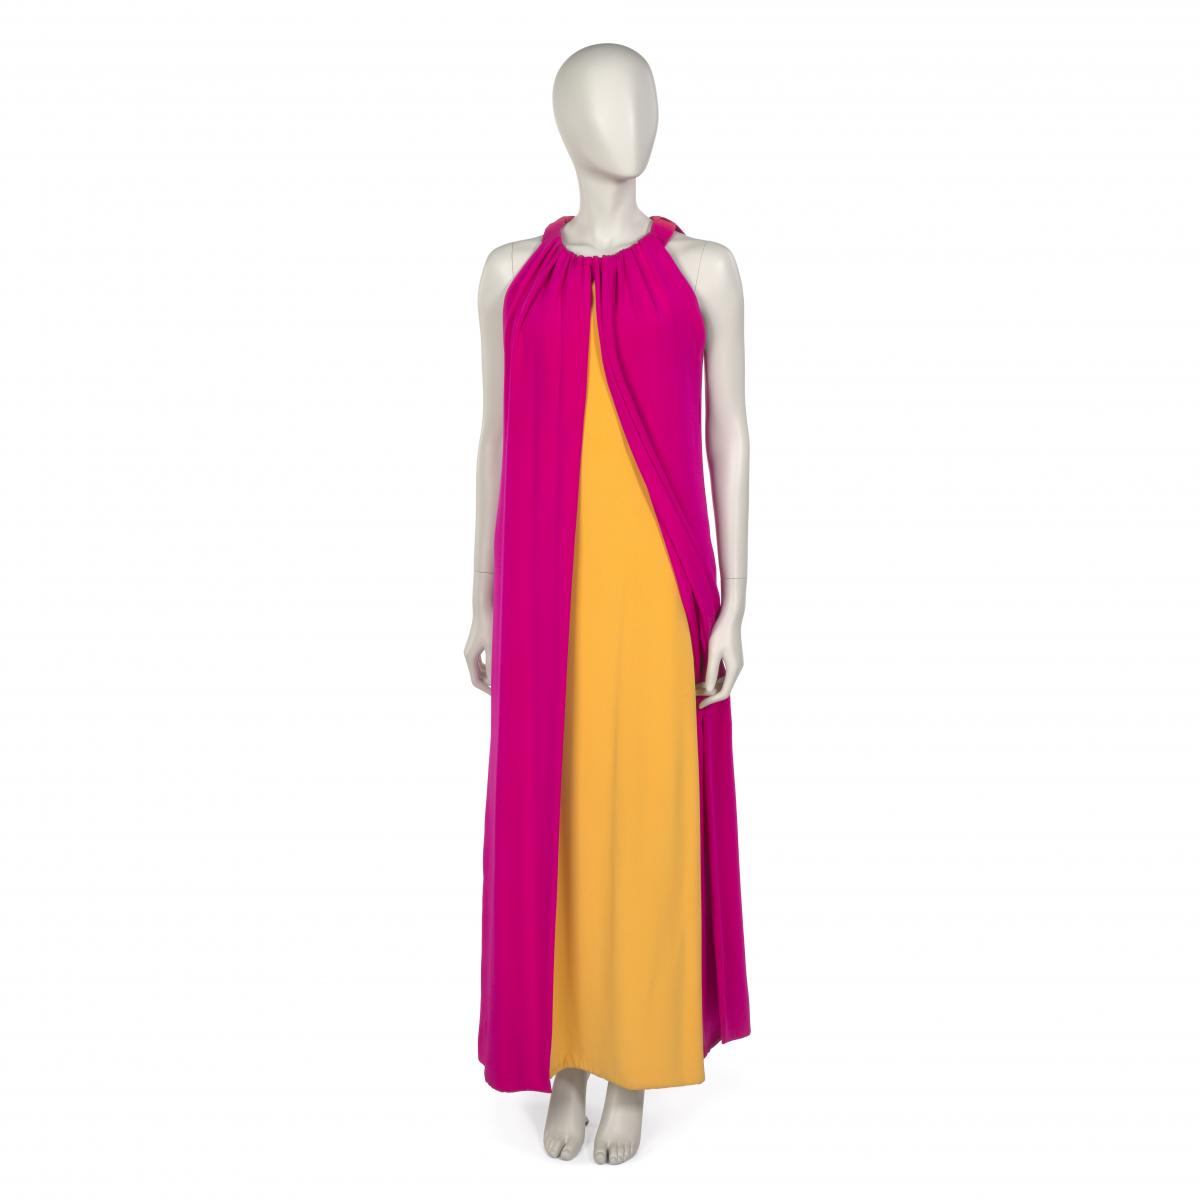 Yves Saint Laurent. [Evening gown in silk crepe], 1967. Museum of the City of New York, 77.98.23.